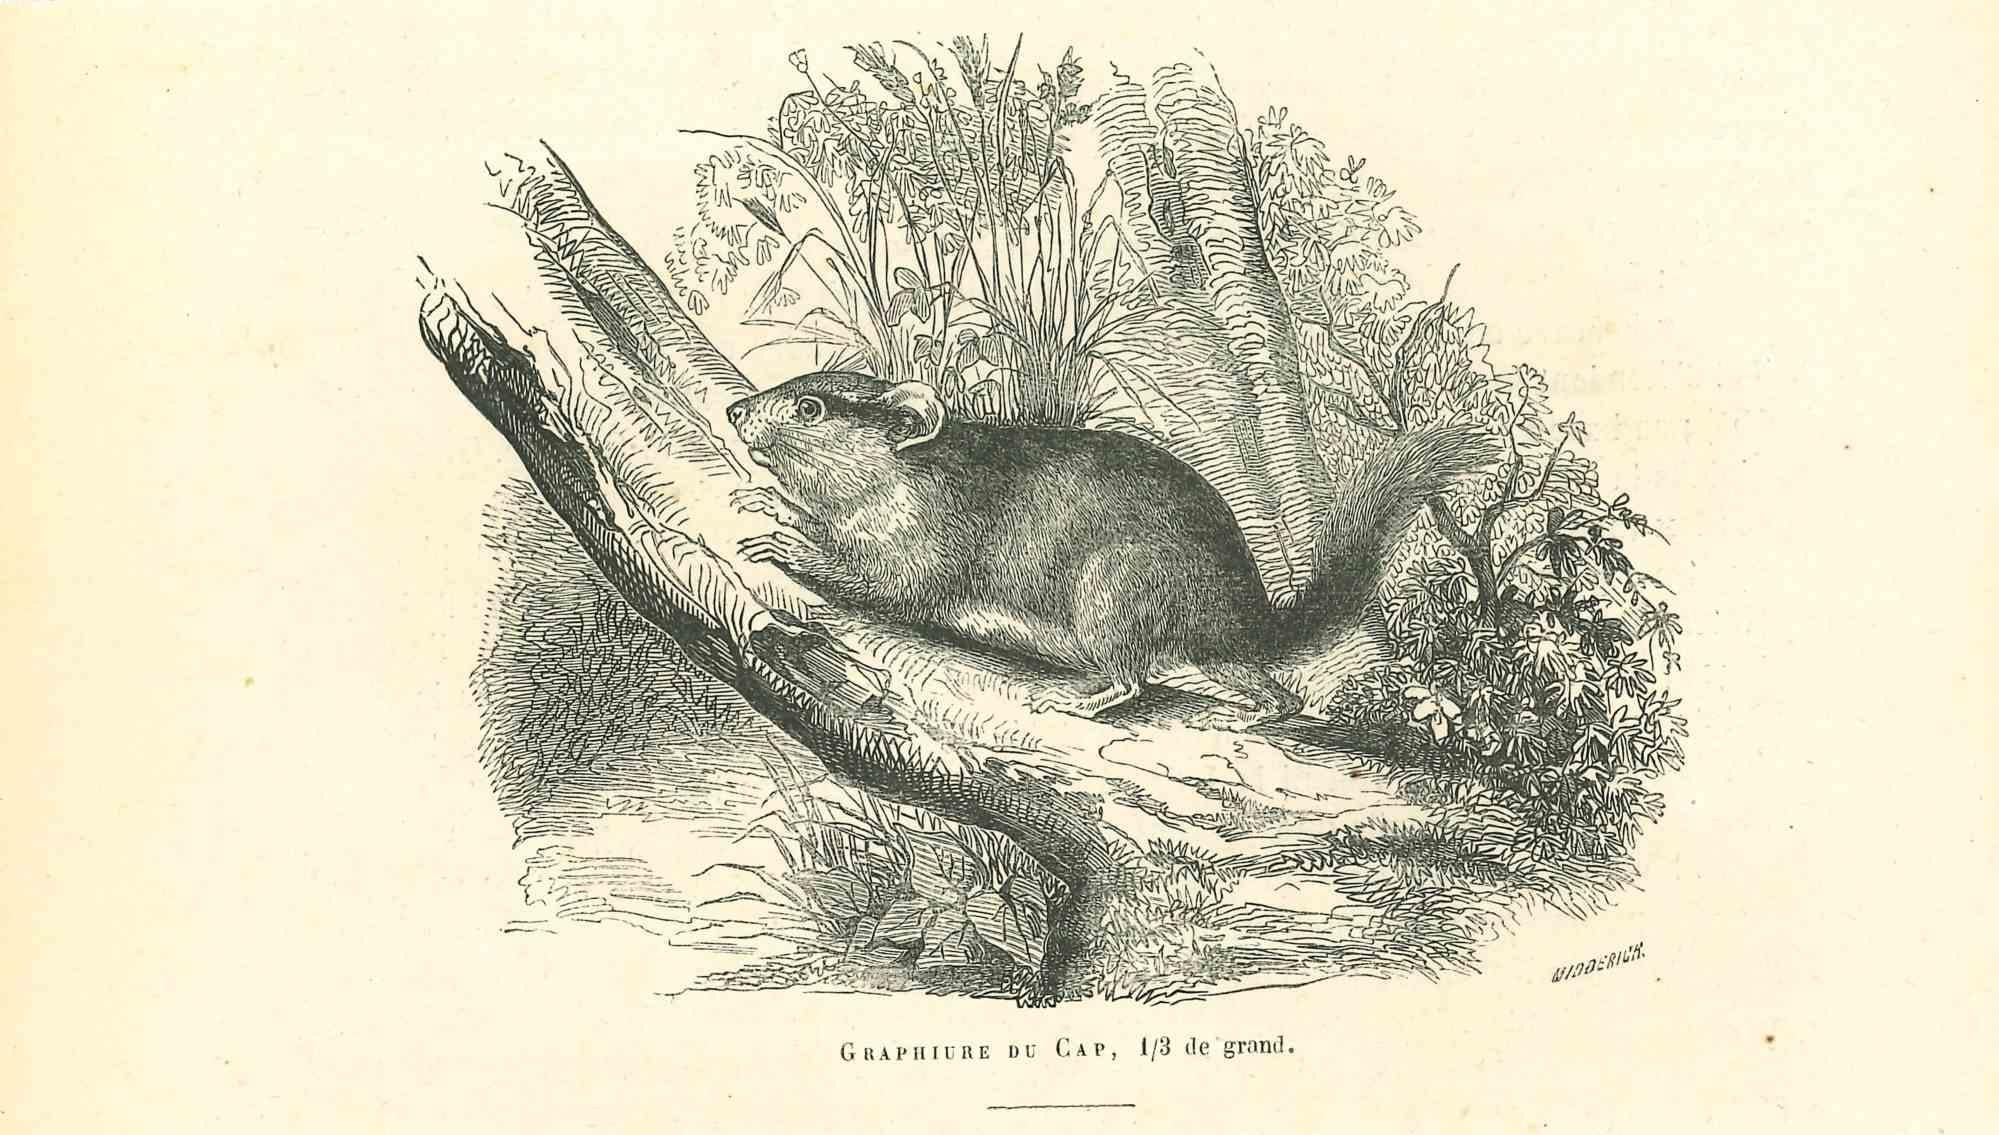 The Mouse is an original lithograph on ivory-colored paper, realized by Paul Gervais (1816-1879). The artwork is from The Series of "Les Trois Règnes de la Nature", and was published in 1854.

Good conditions.

Titled on the lower.

The series of